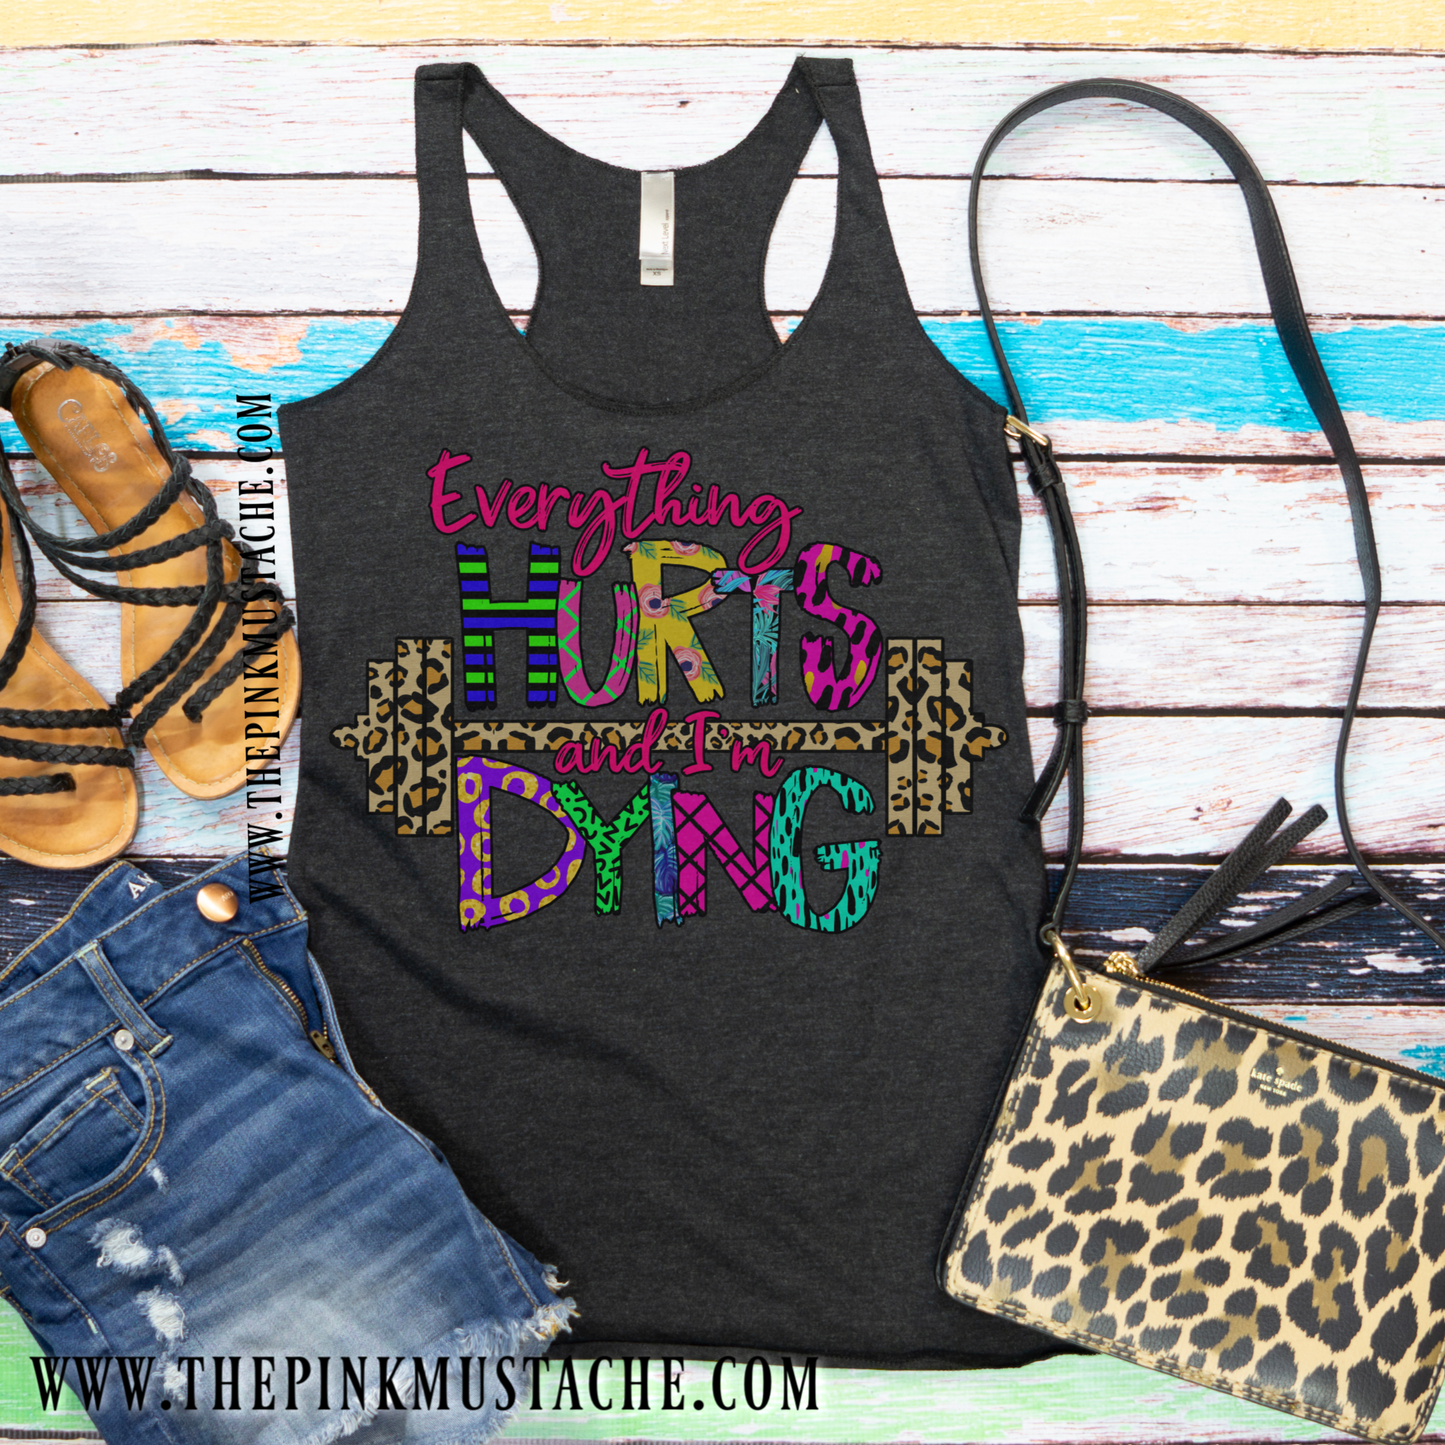 Everything Hurts and I'm Dying Tank Top / Workout Tank / Crossfit Tank